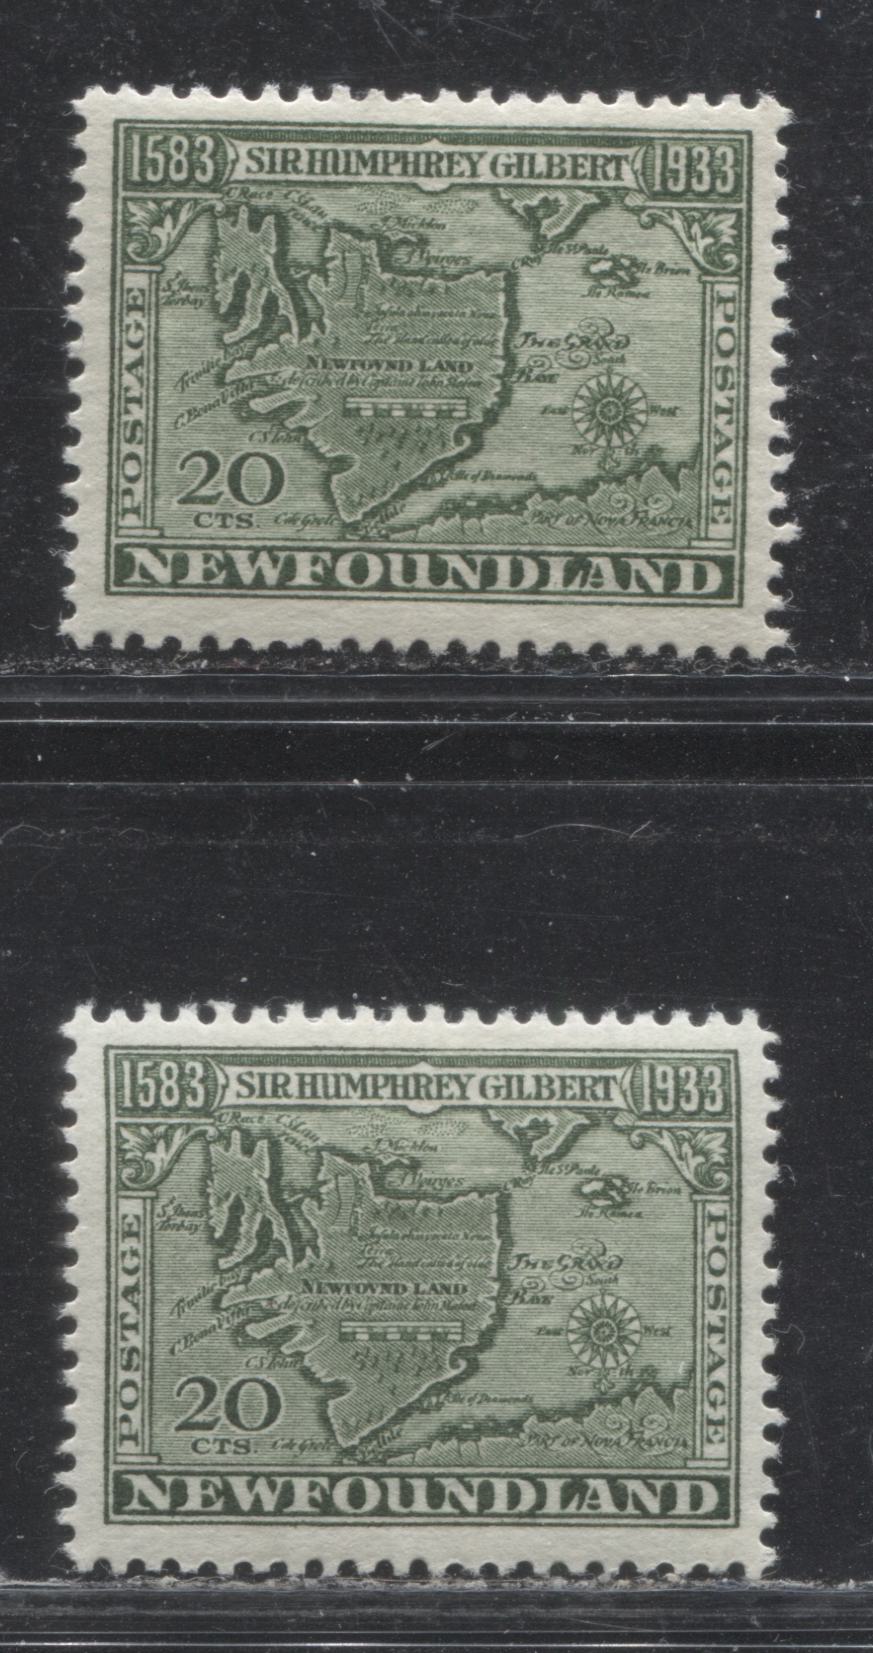 Lot 119 Newfoundland # 223 20c Bronze Green Map of Newfoundland, 1933 Sir Humphrey Gilbert Issue, Two VFOG Examples, Comb Perf. 13.4 x 13.6 and 13.5 x 13.6